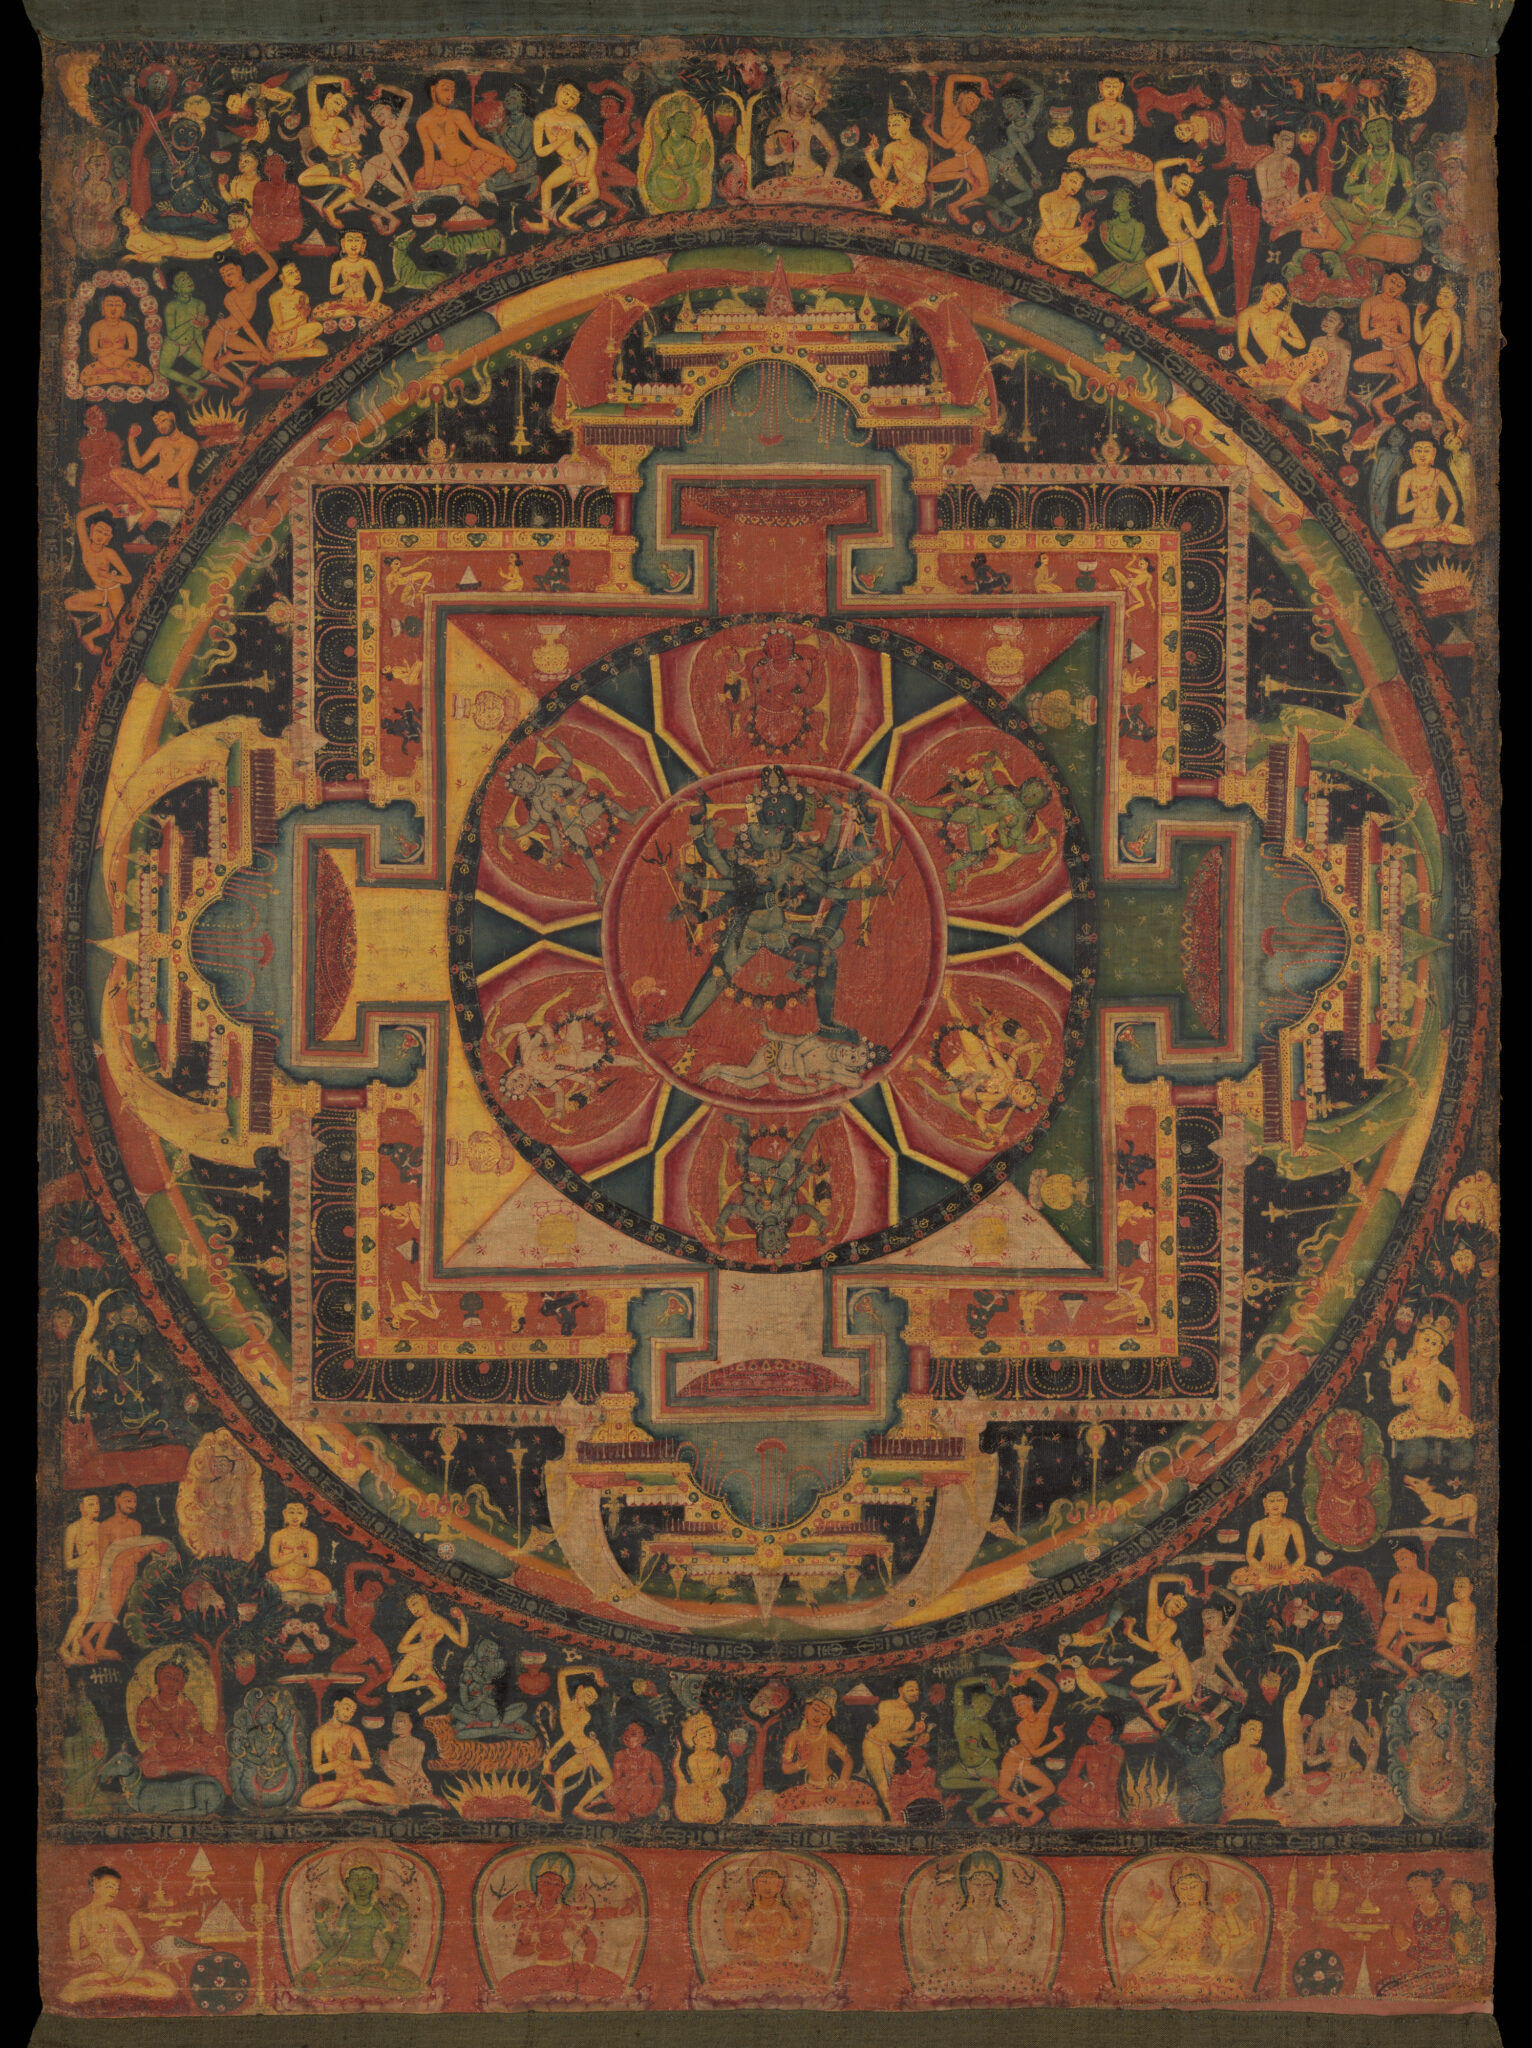 Blue-skinned deity stands in center of geometric arrangement of circles and squares featuring architectural forms at cardinal points